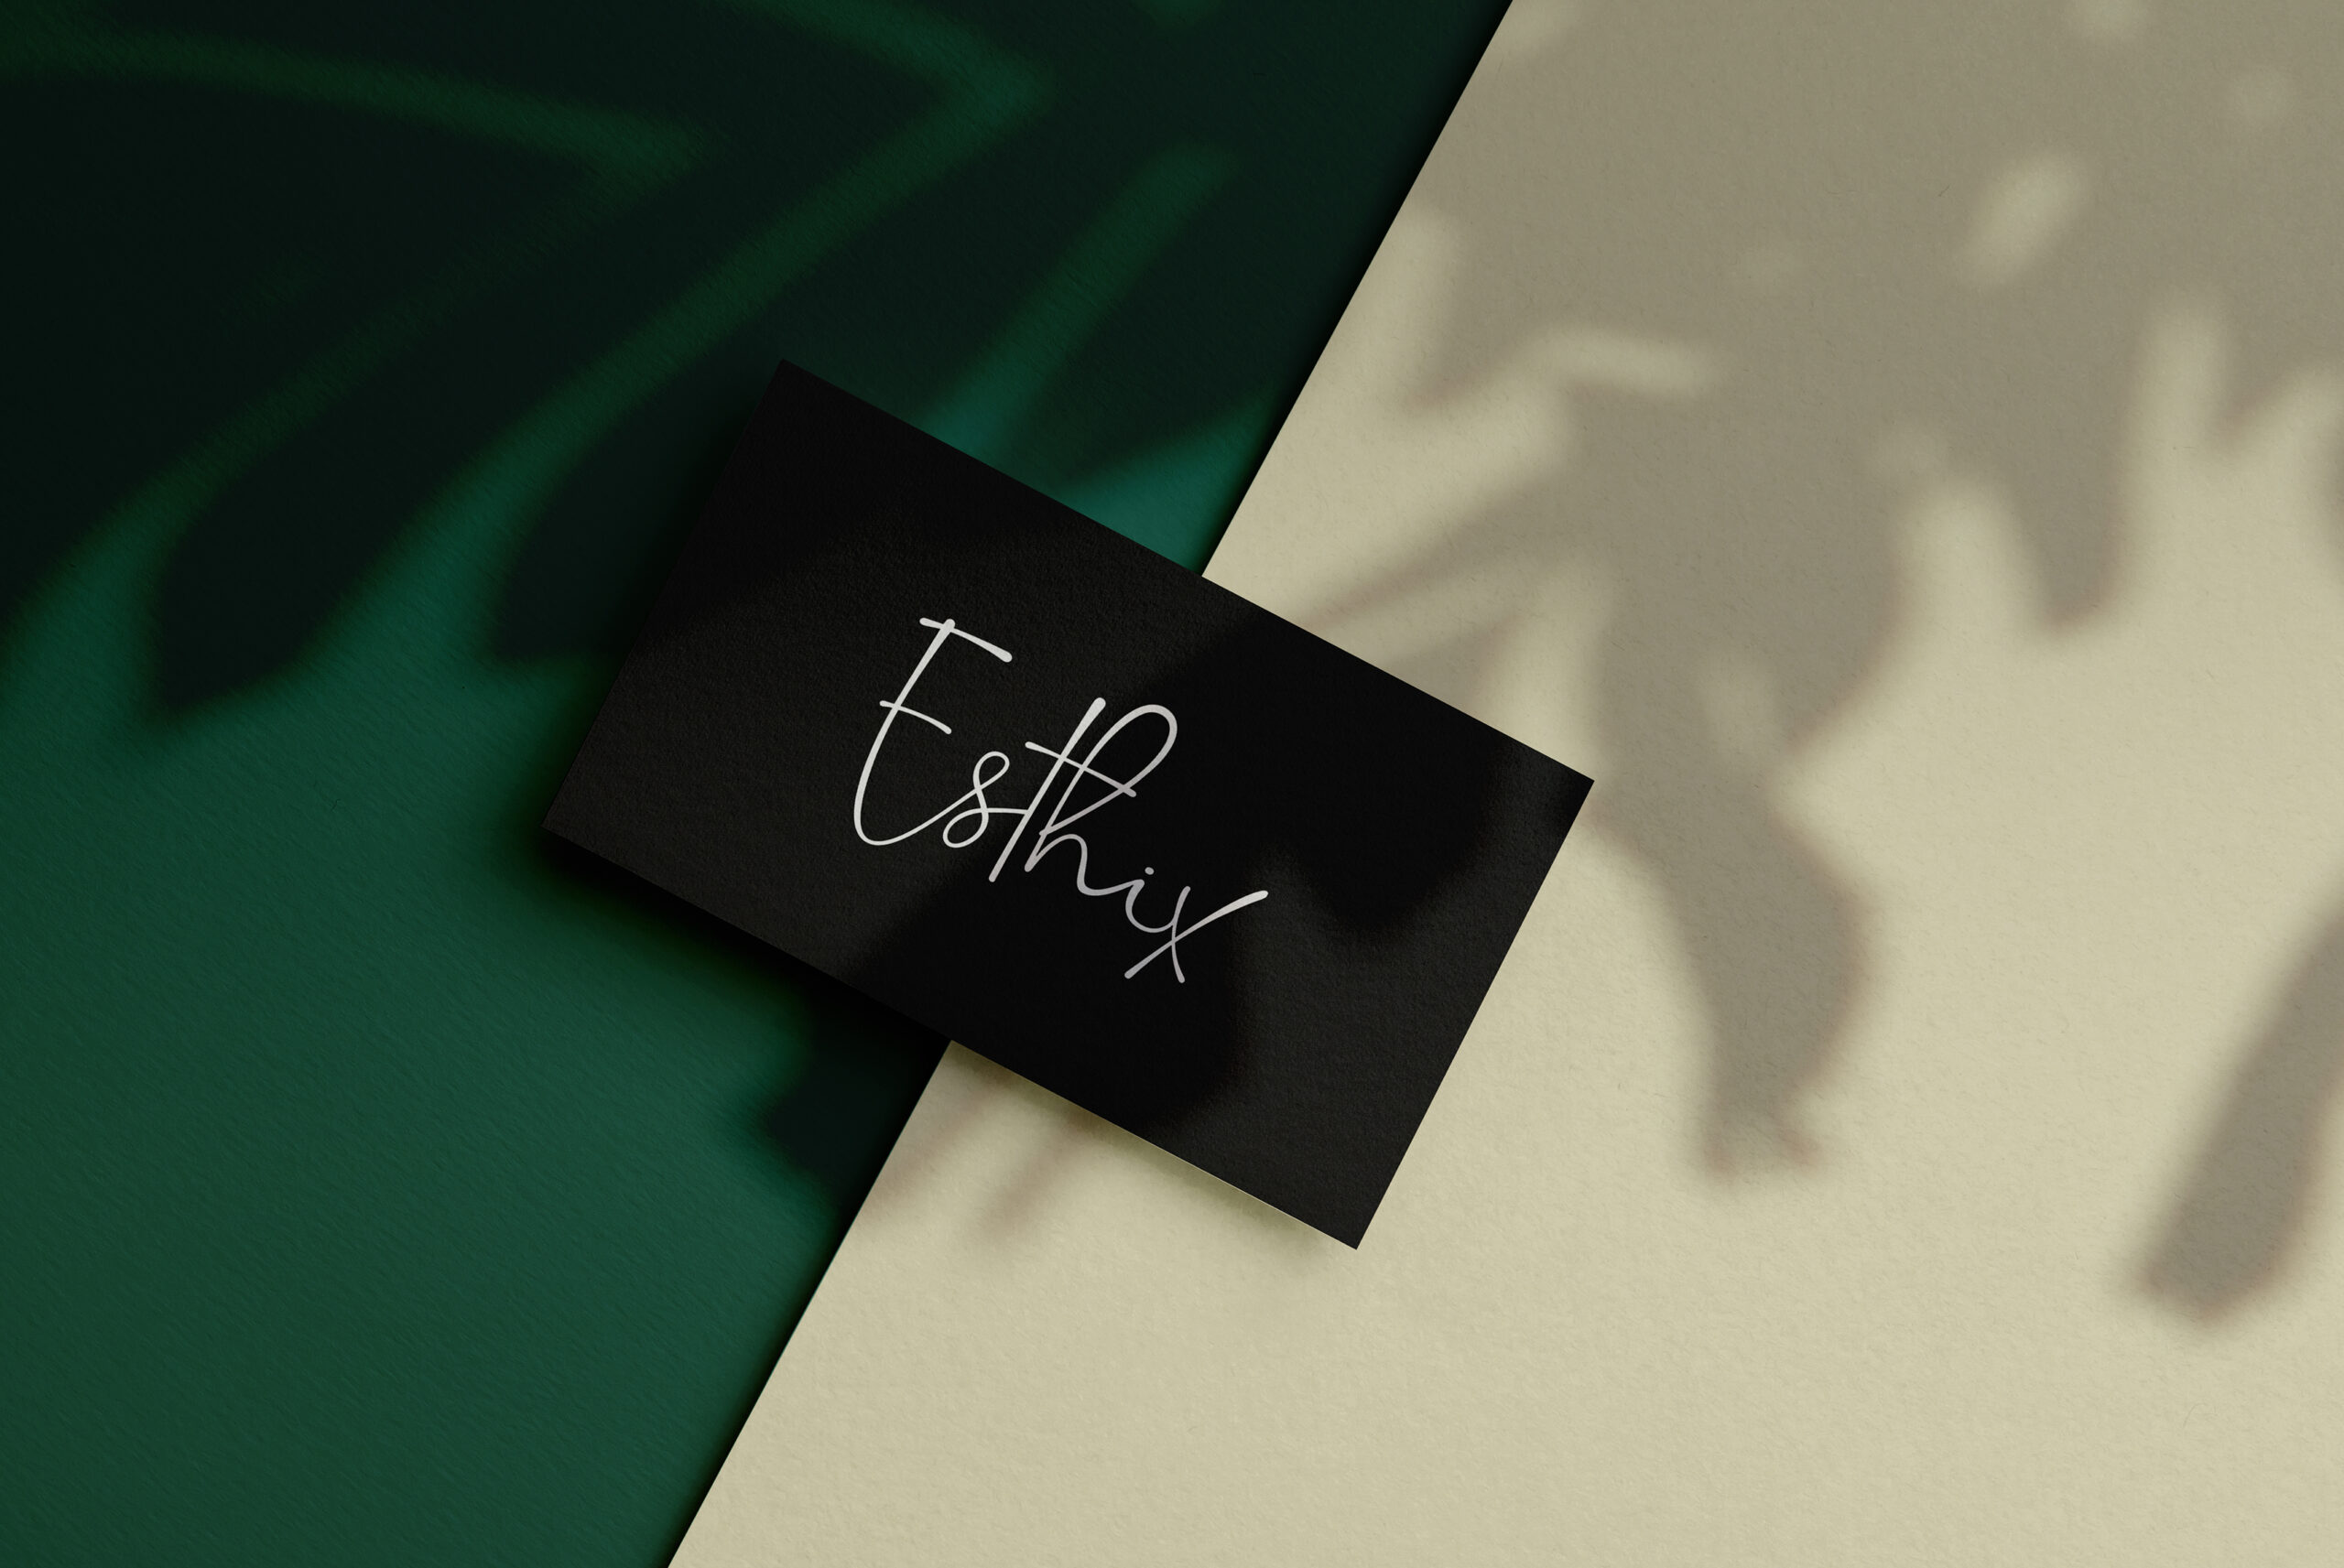 Picture of Esthix logo on a business card